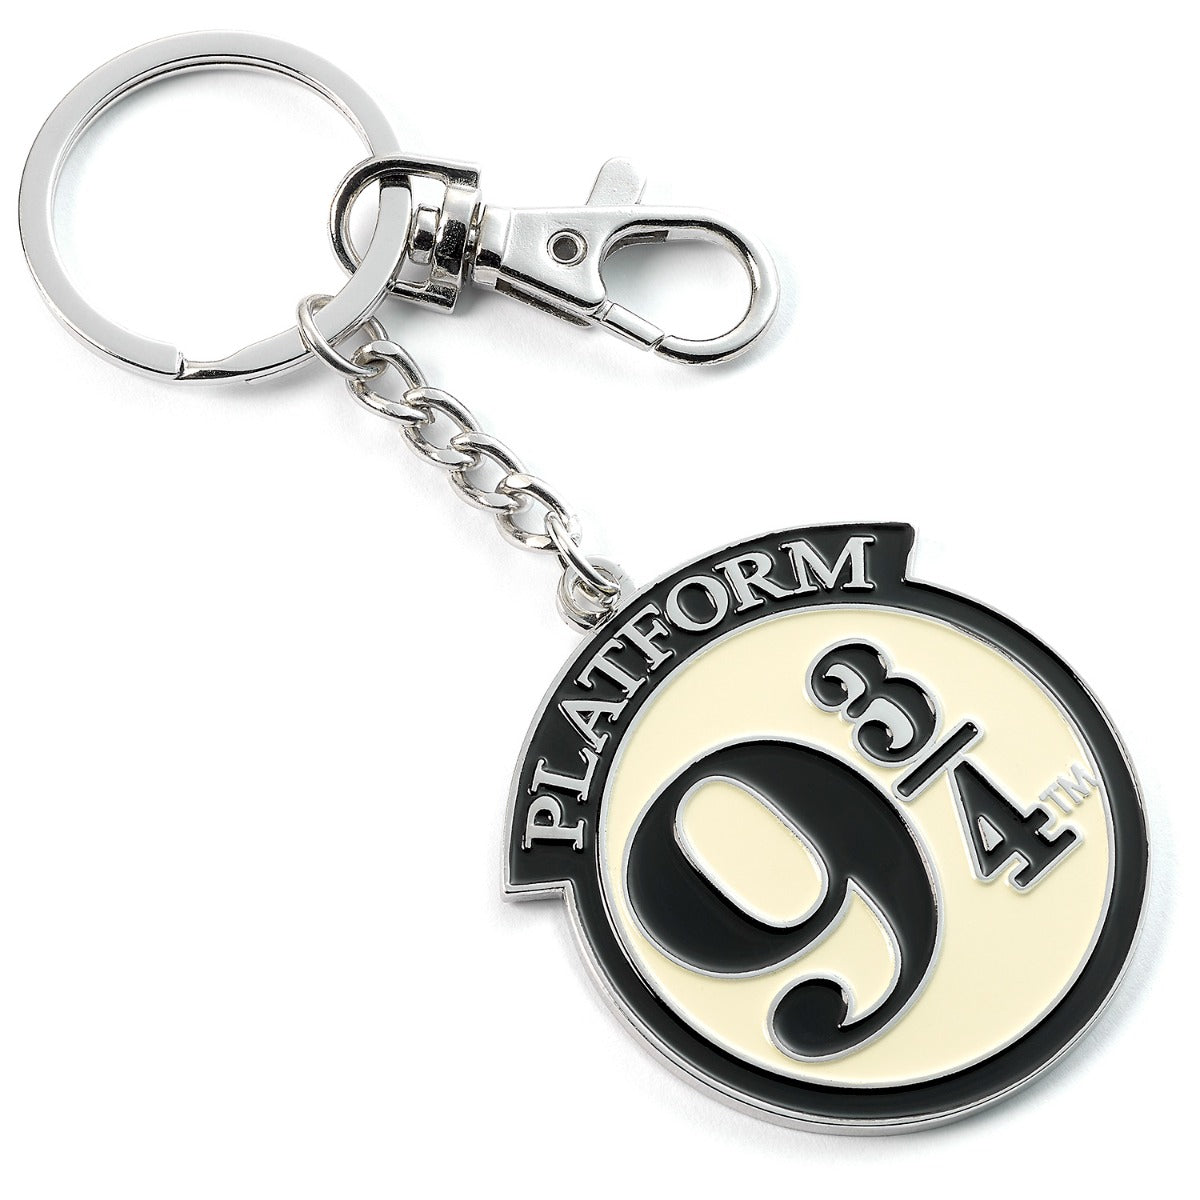 Load image into Gallery viewer, Platform 9 3/4 (Harry Potter) Keychain
